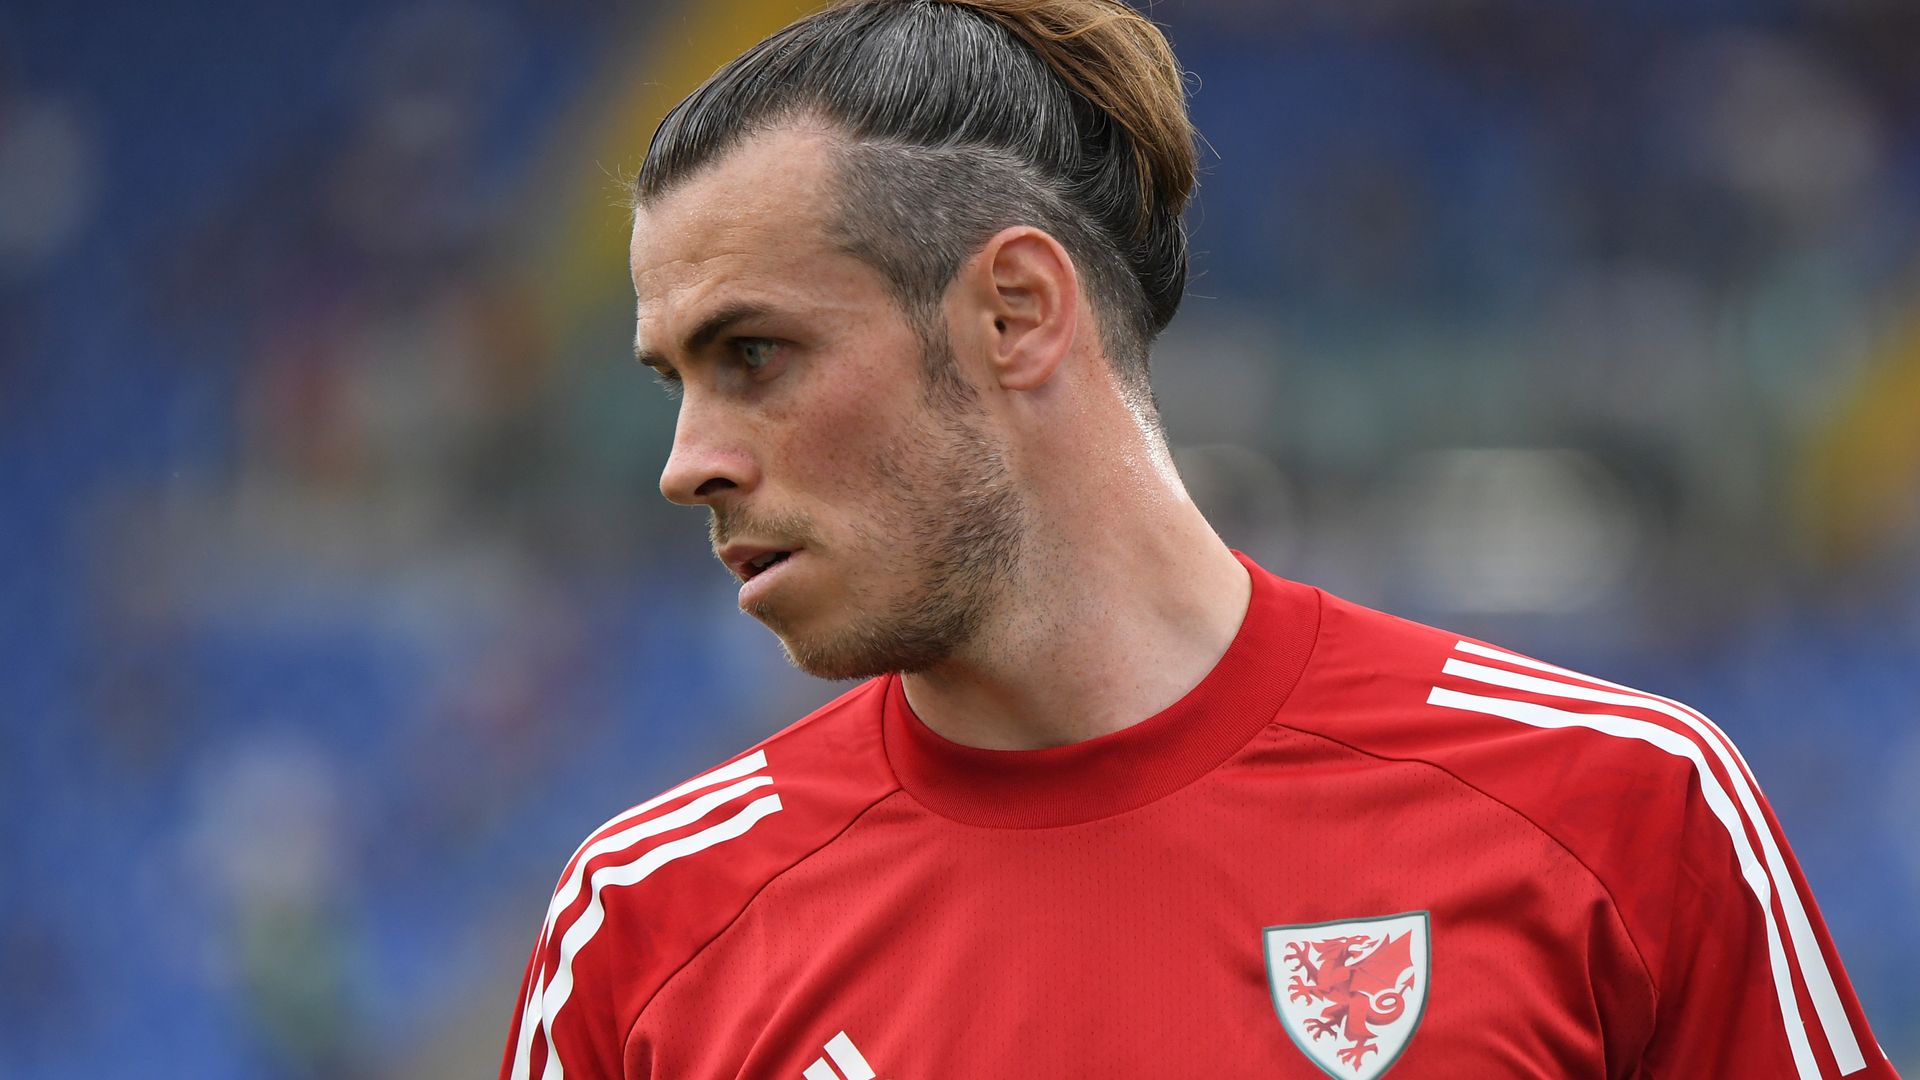 Hennessey: Bale in 'good shape' ahead of 100th cap